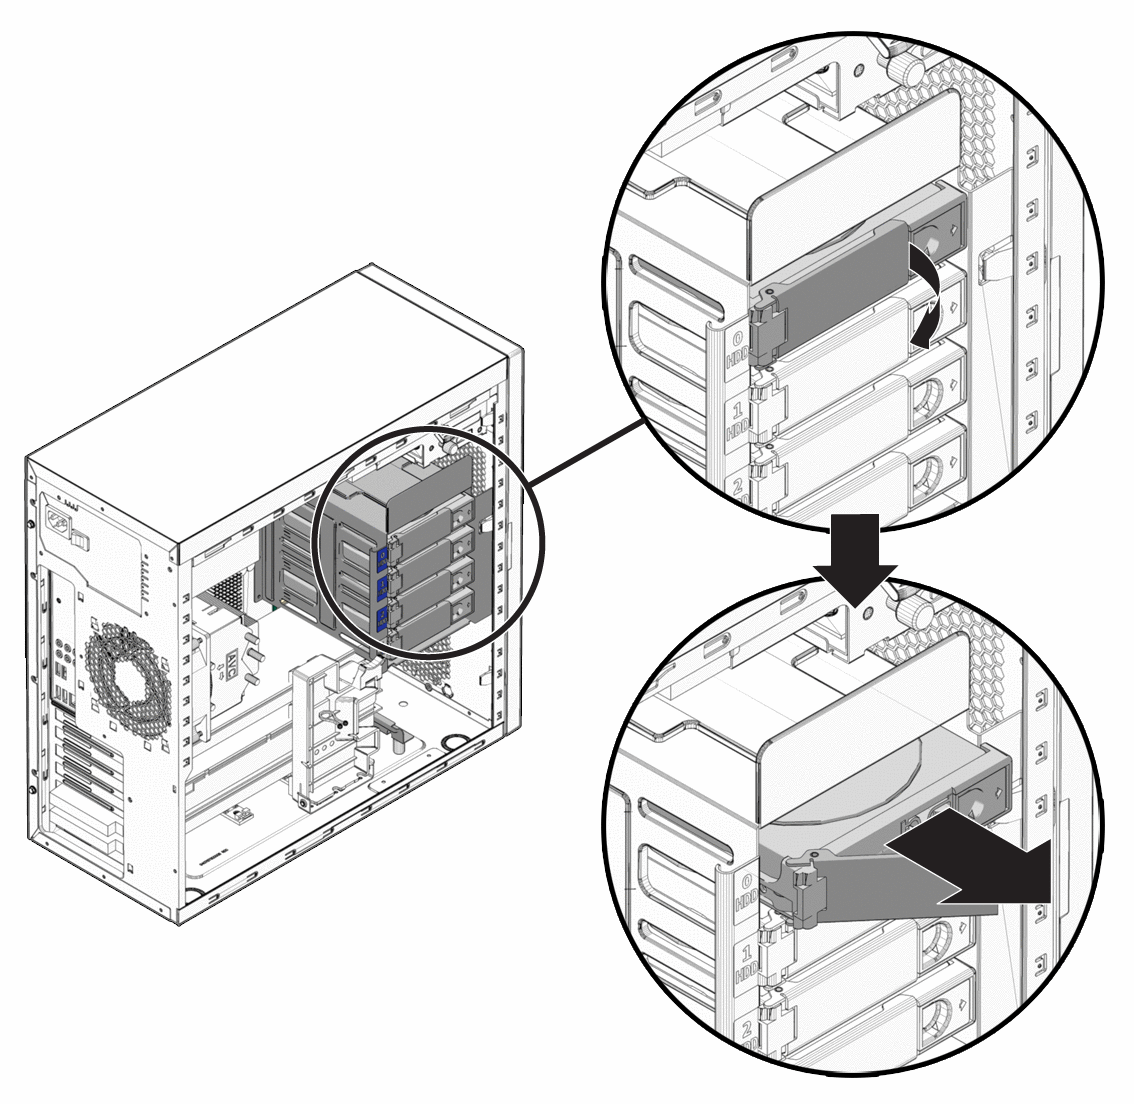 An illustration showing the removal of a hard drive from
the hard drive cage.